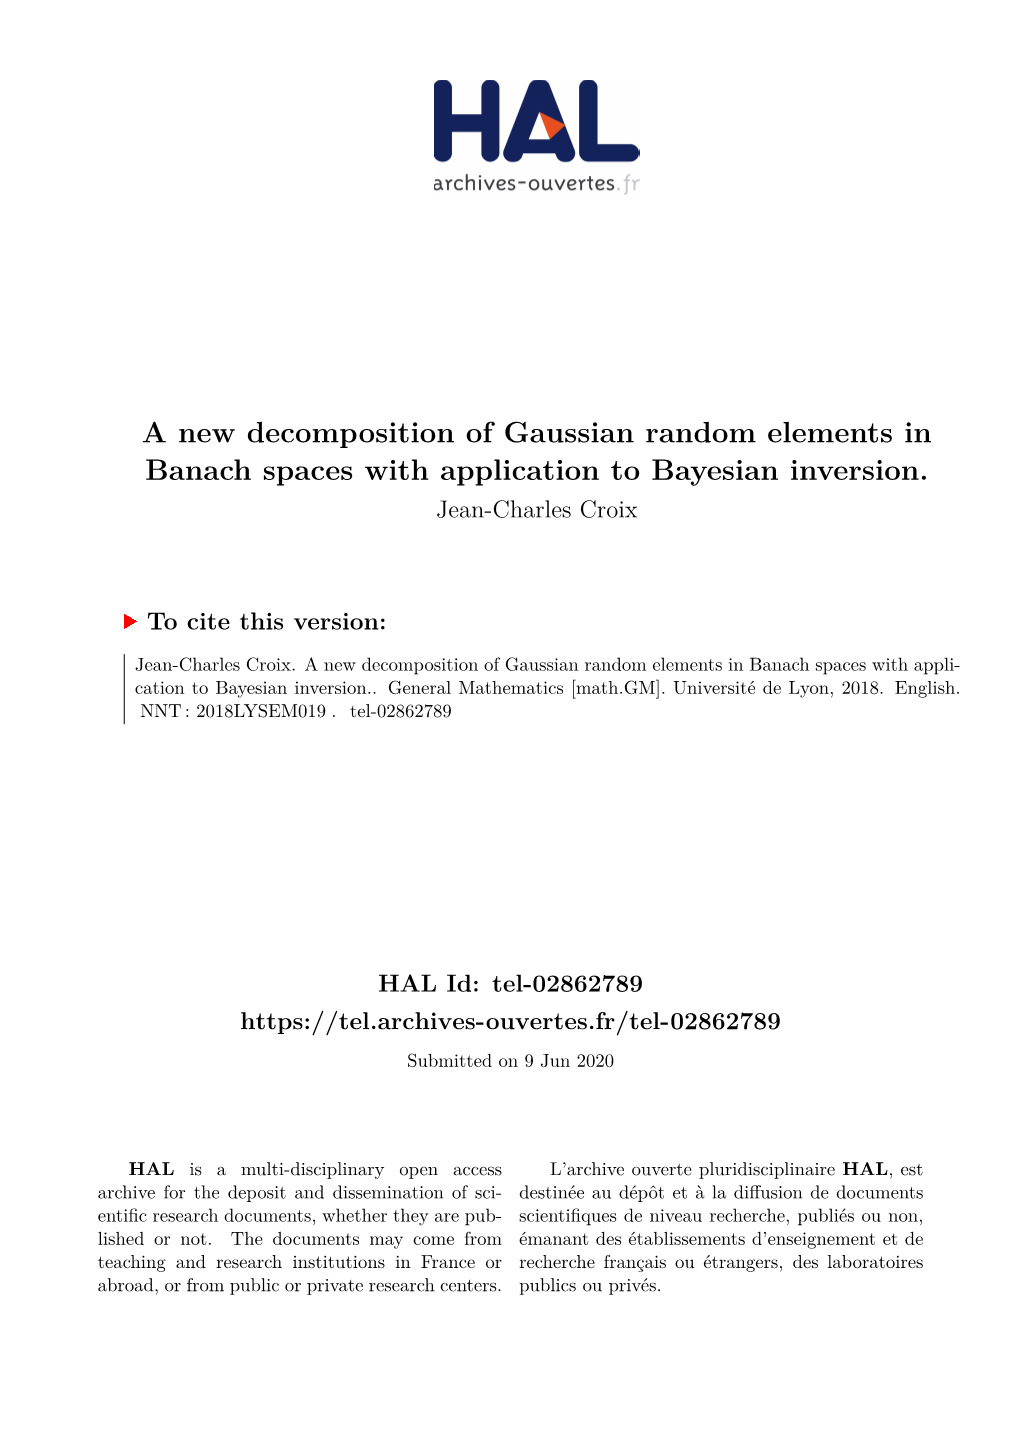 A New Decomposition of Gaussian Random Elements in Banach Spaces with Application to Bayesian Inversion